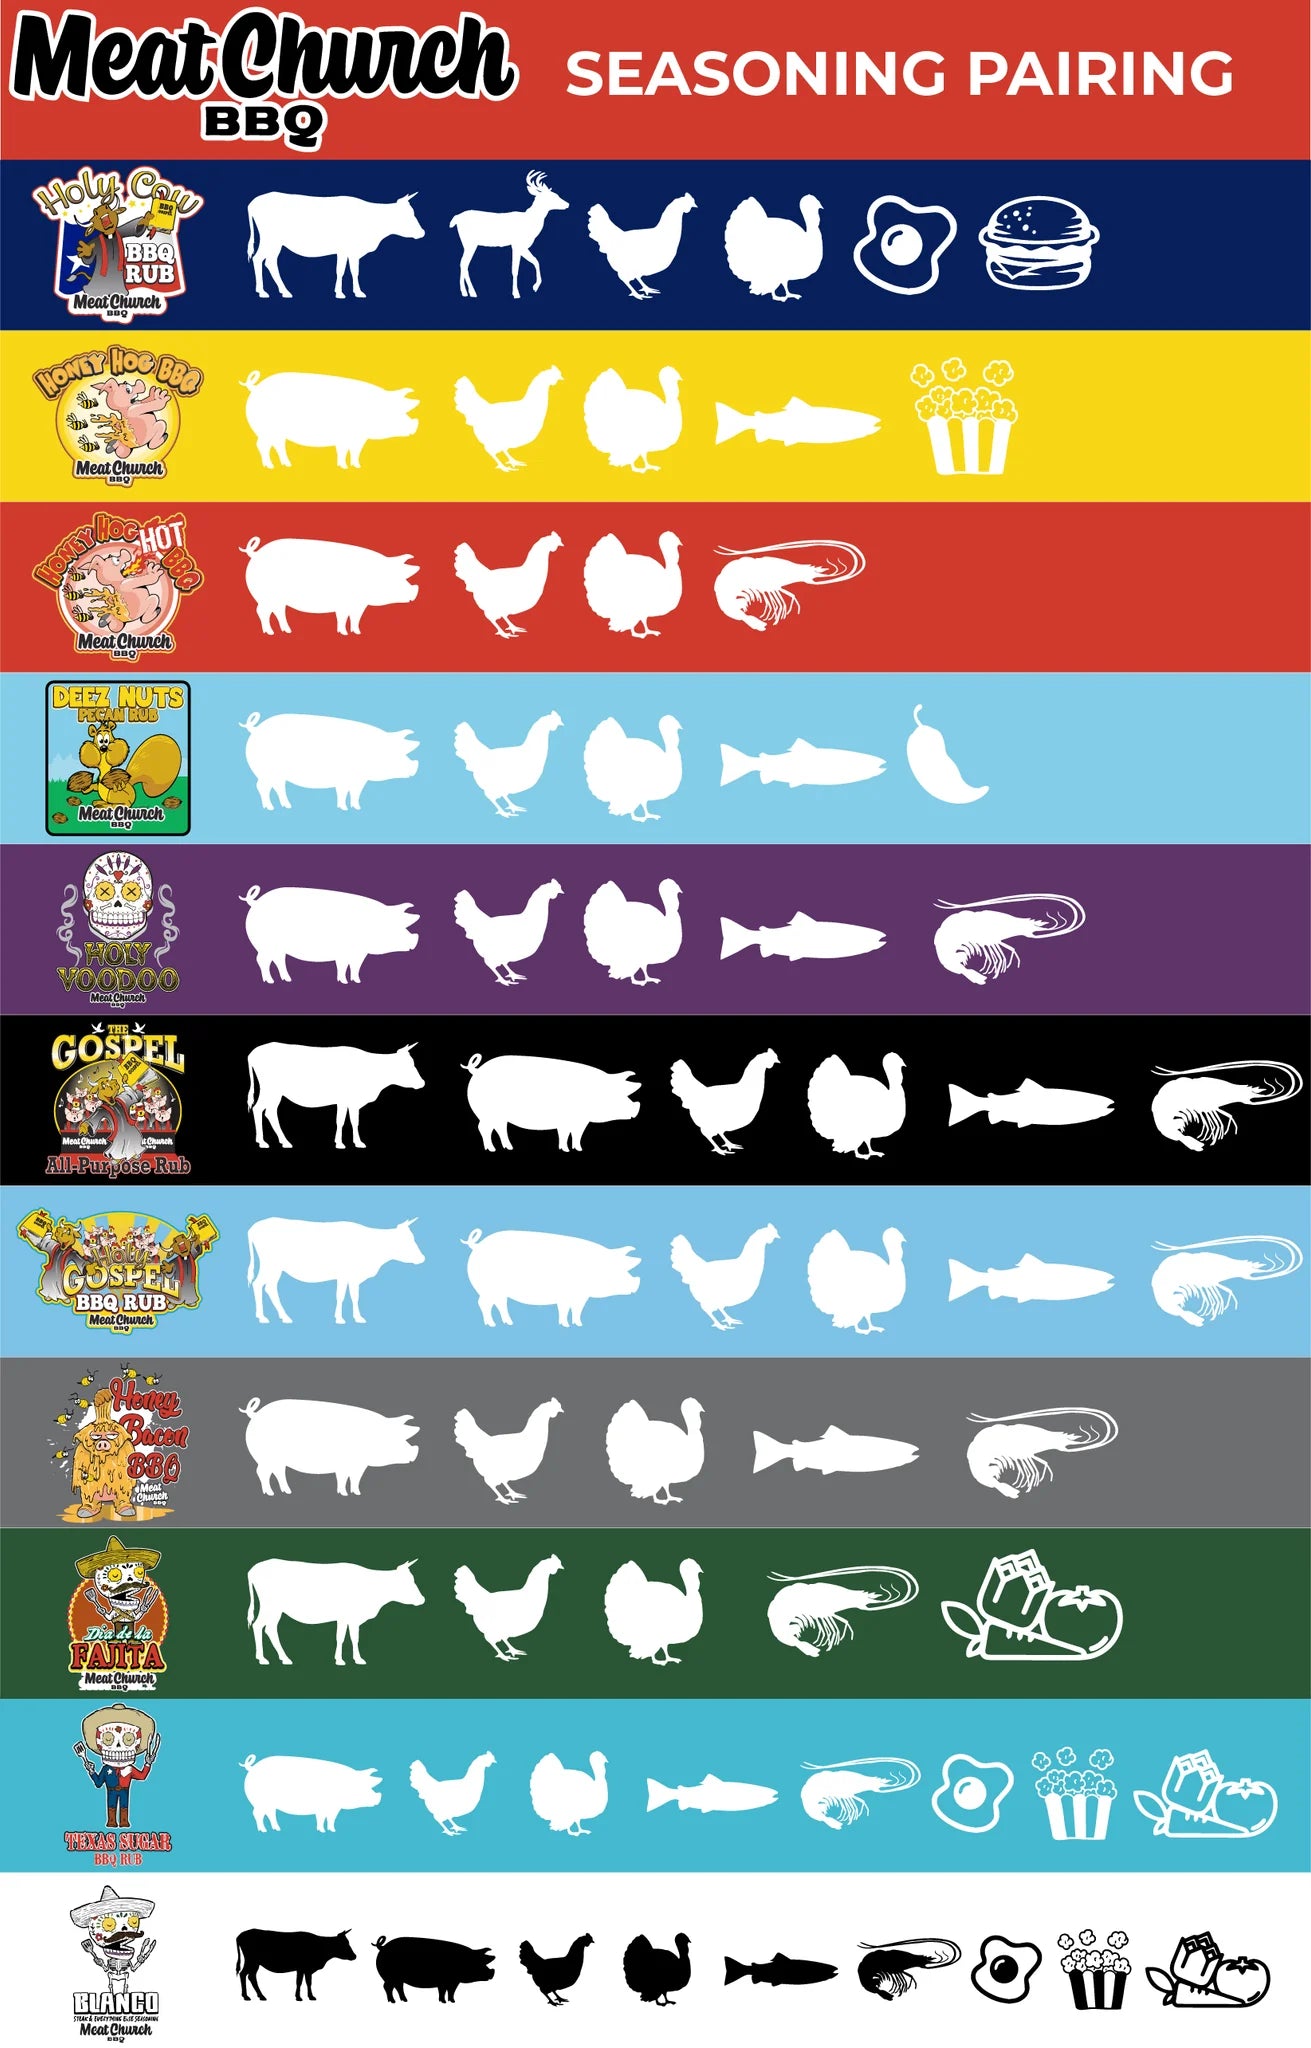 A chart illustrating seasoning pairings for various Meat Church BBQ rubs. The chart is divided into colored rows, each representing a different rub, with icons indicating which types of meat or food each seasoning pairs well with. Icons include cows, pigs, chickens, turkeys, fish, and other foods.